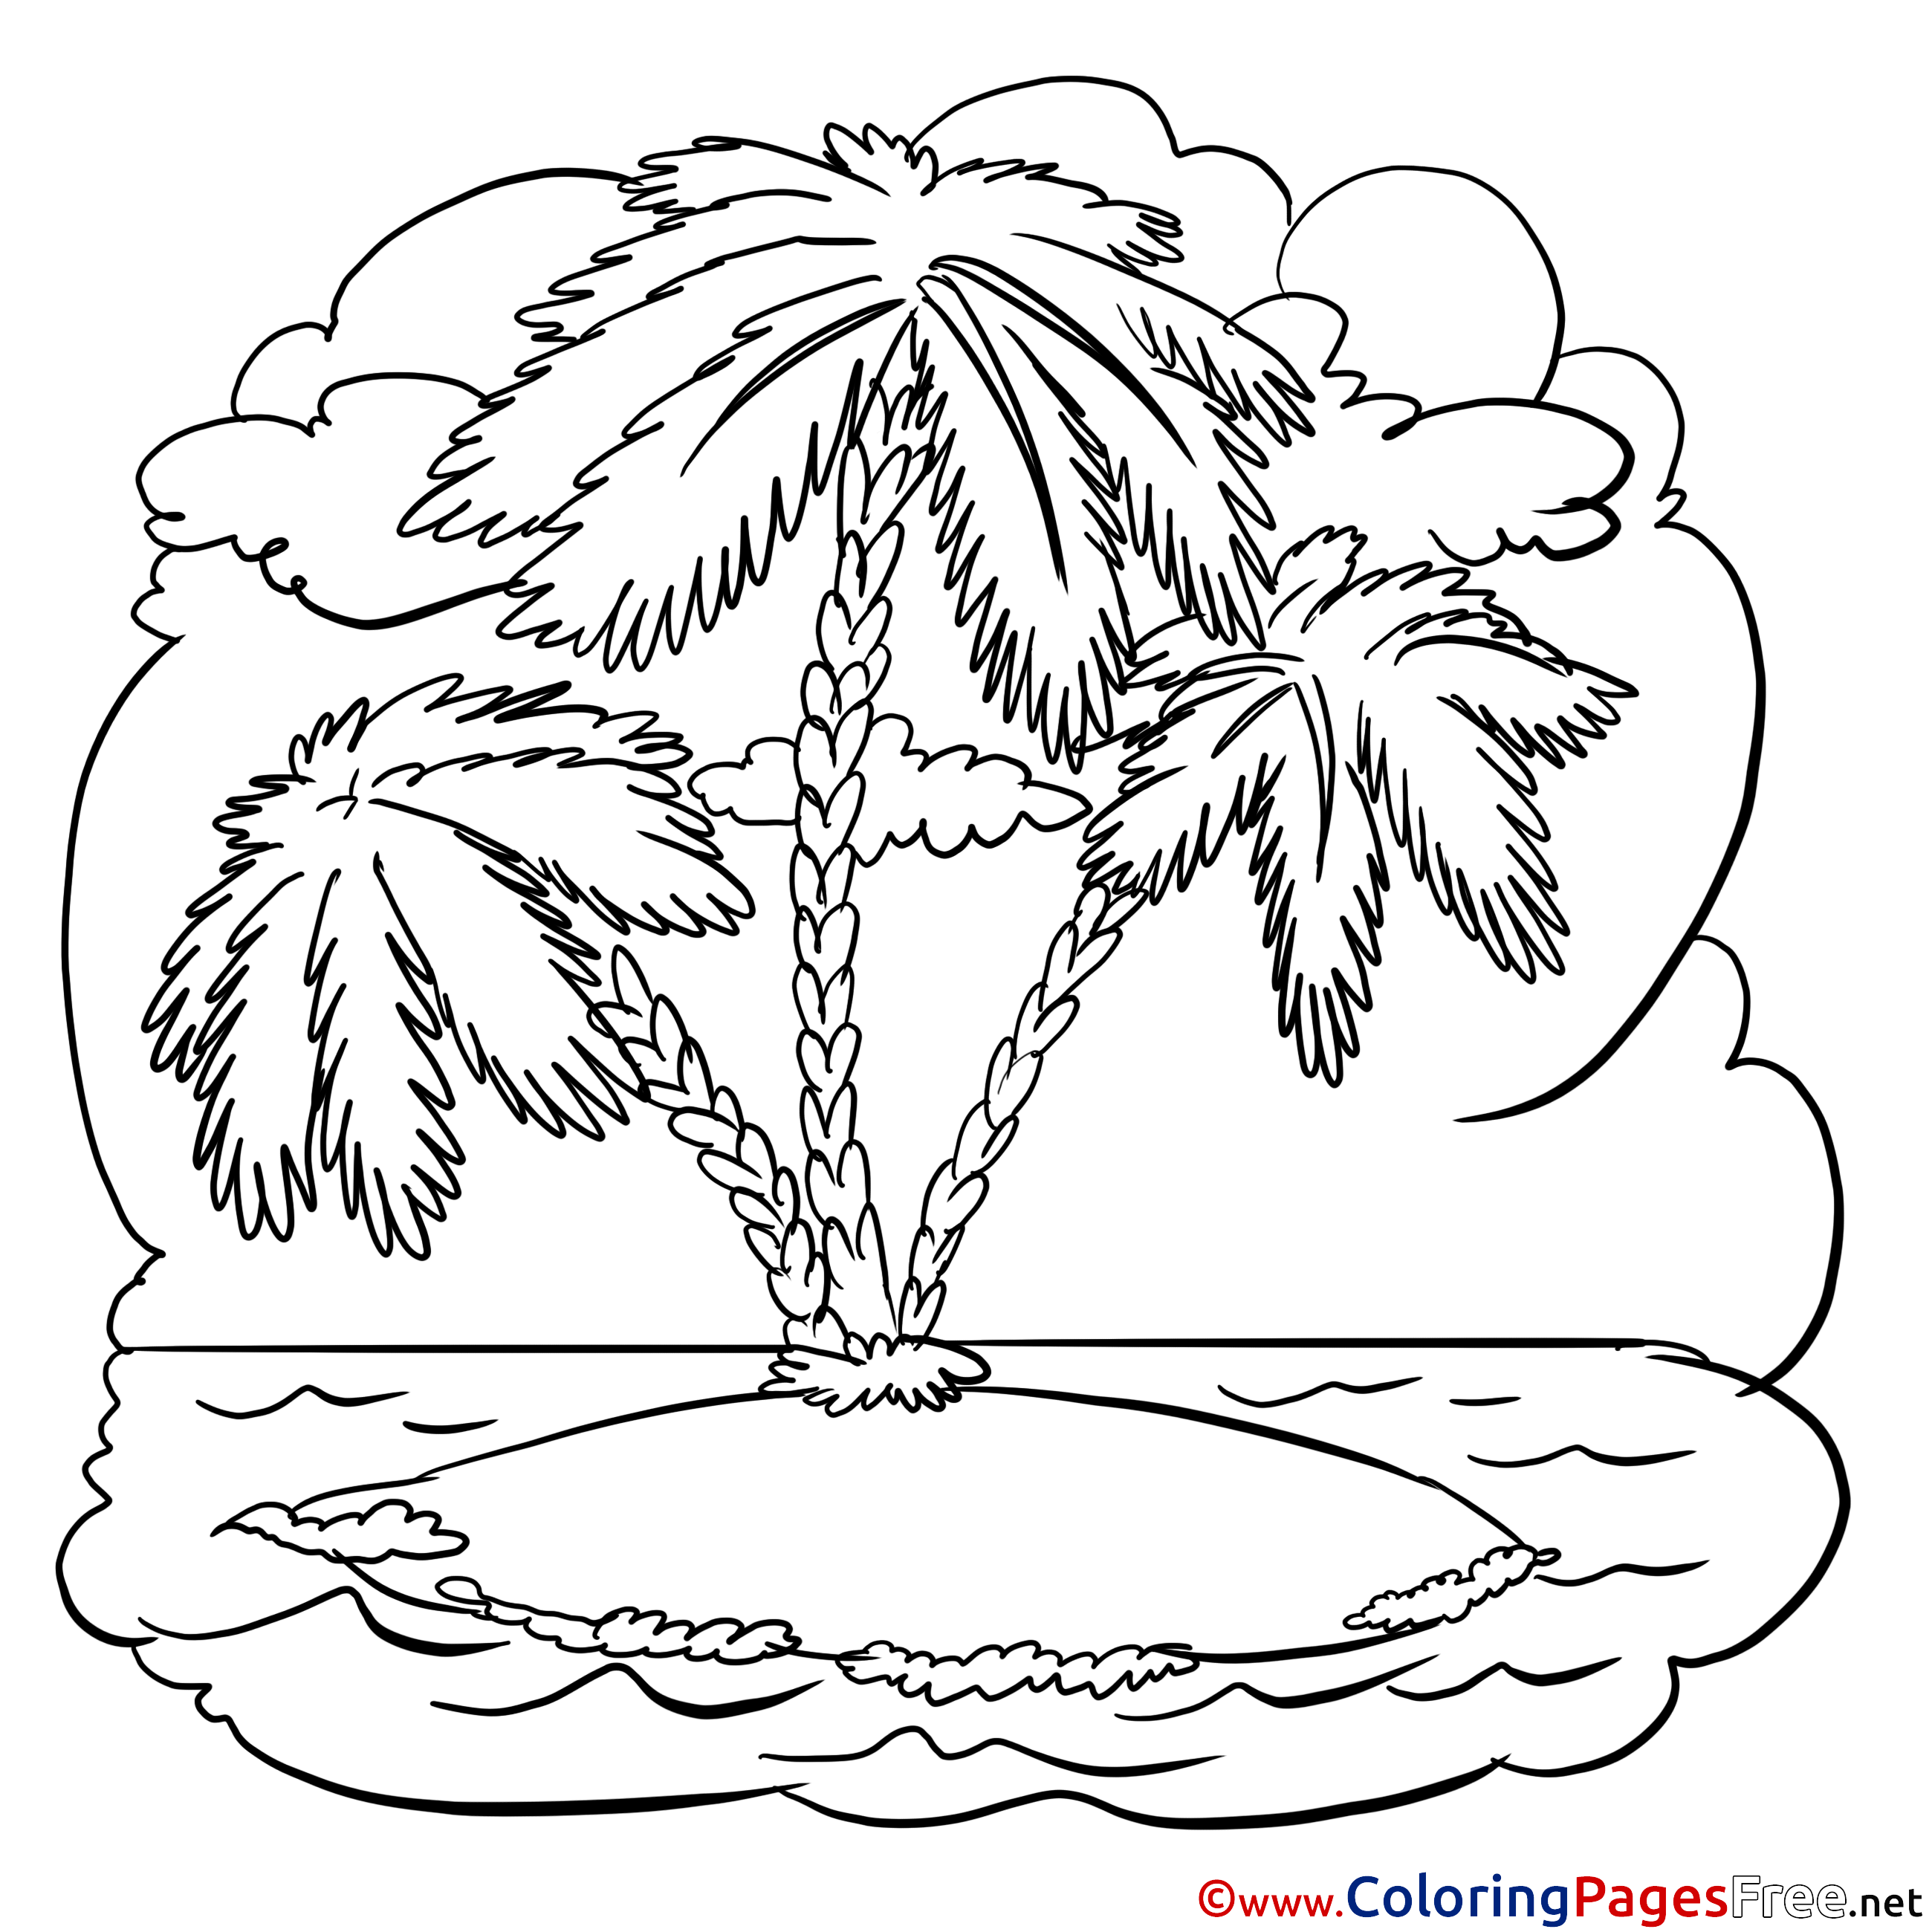 island-palm-tree-page-coloring-pages